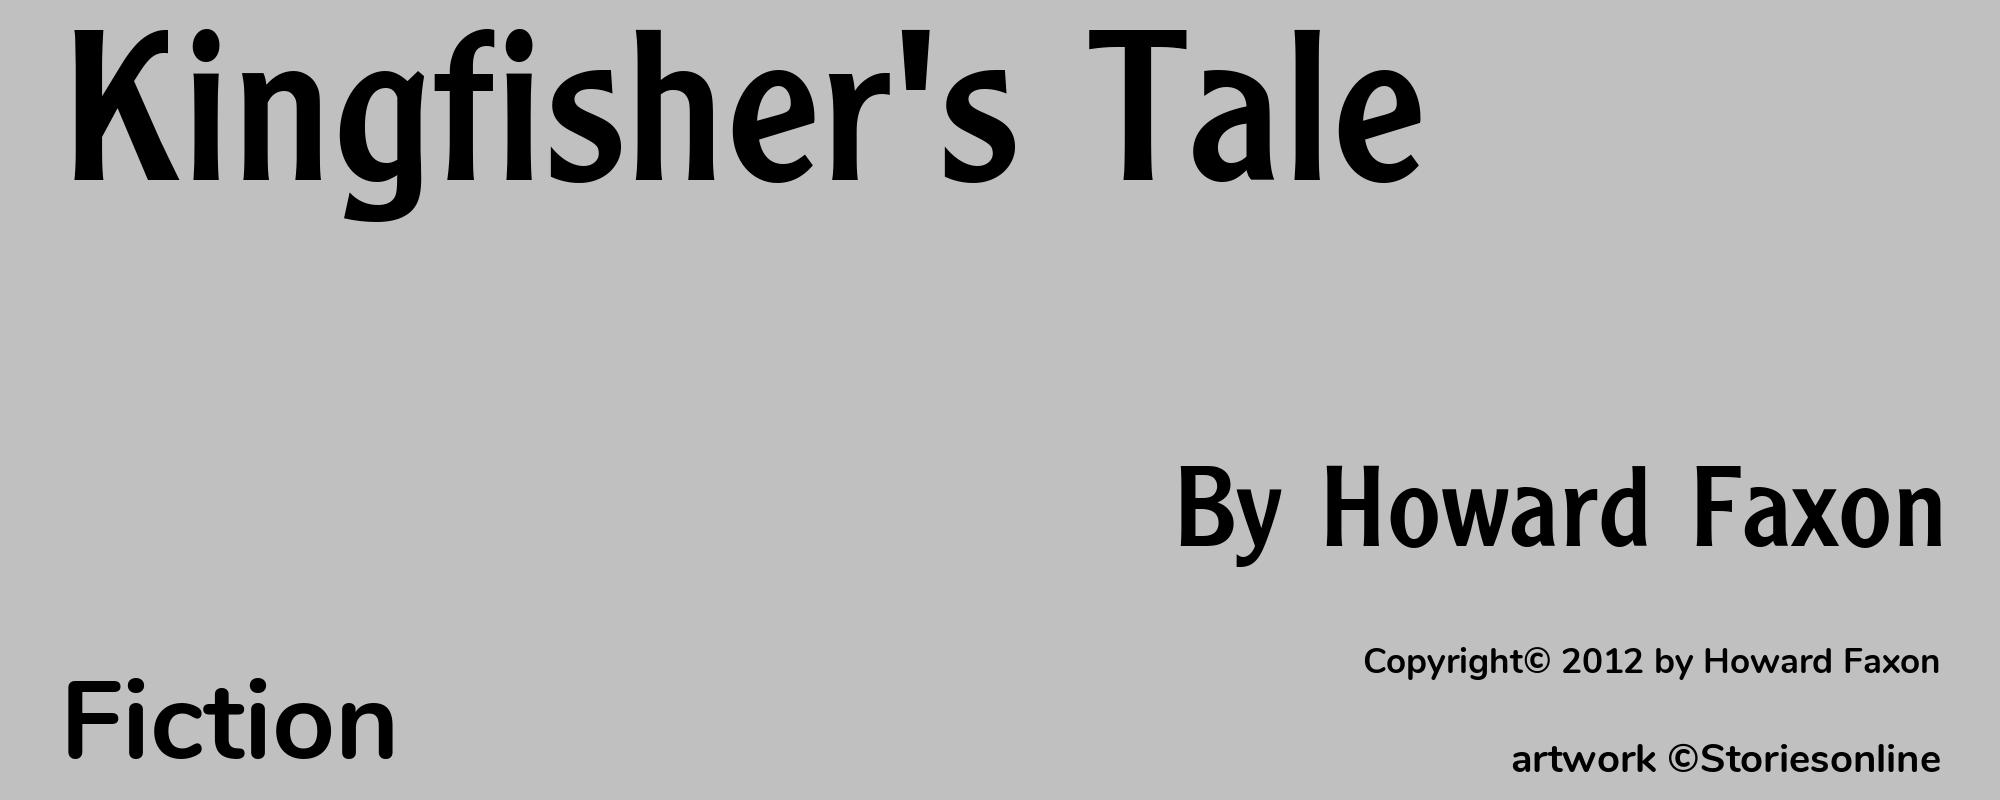 Kingfisher's Tale - Cover